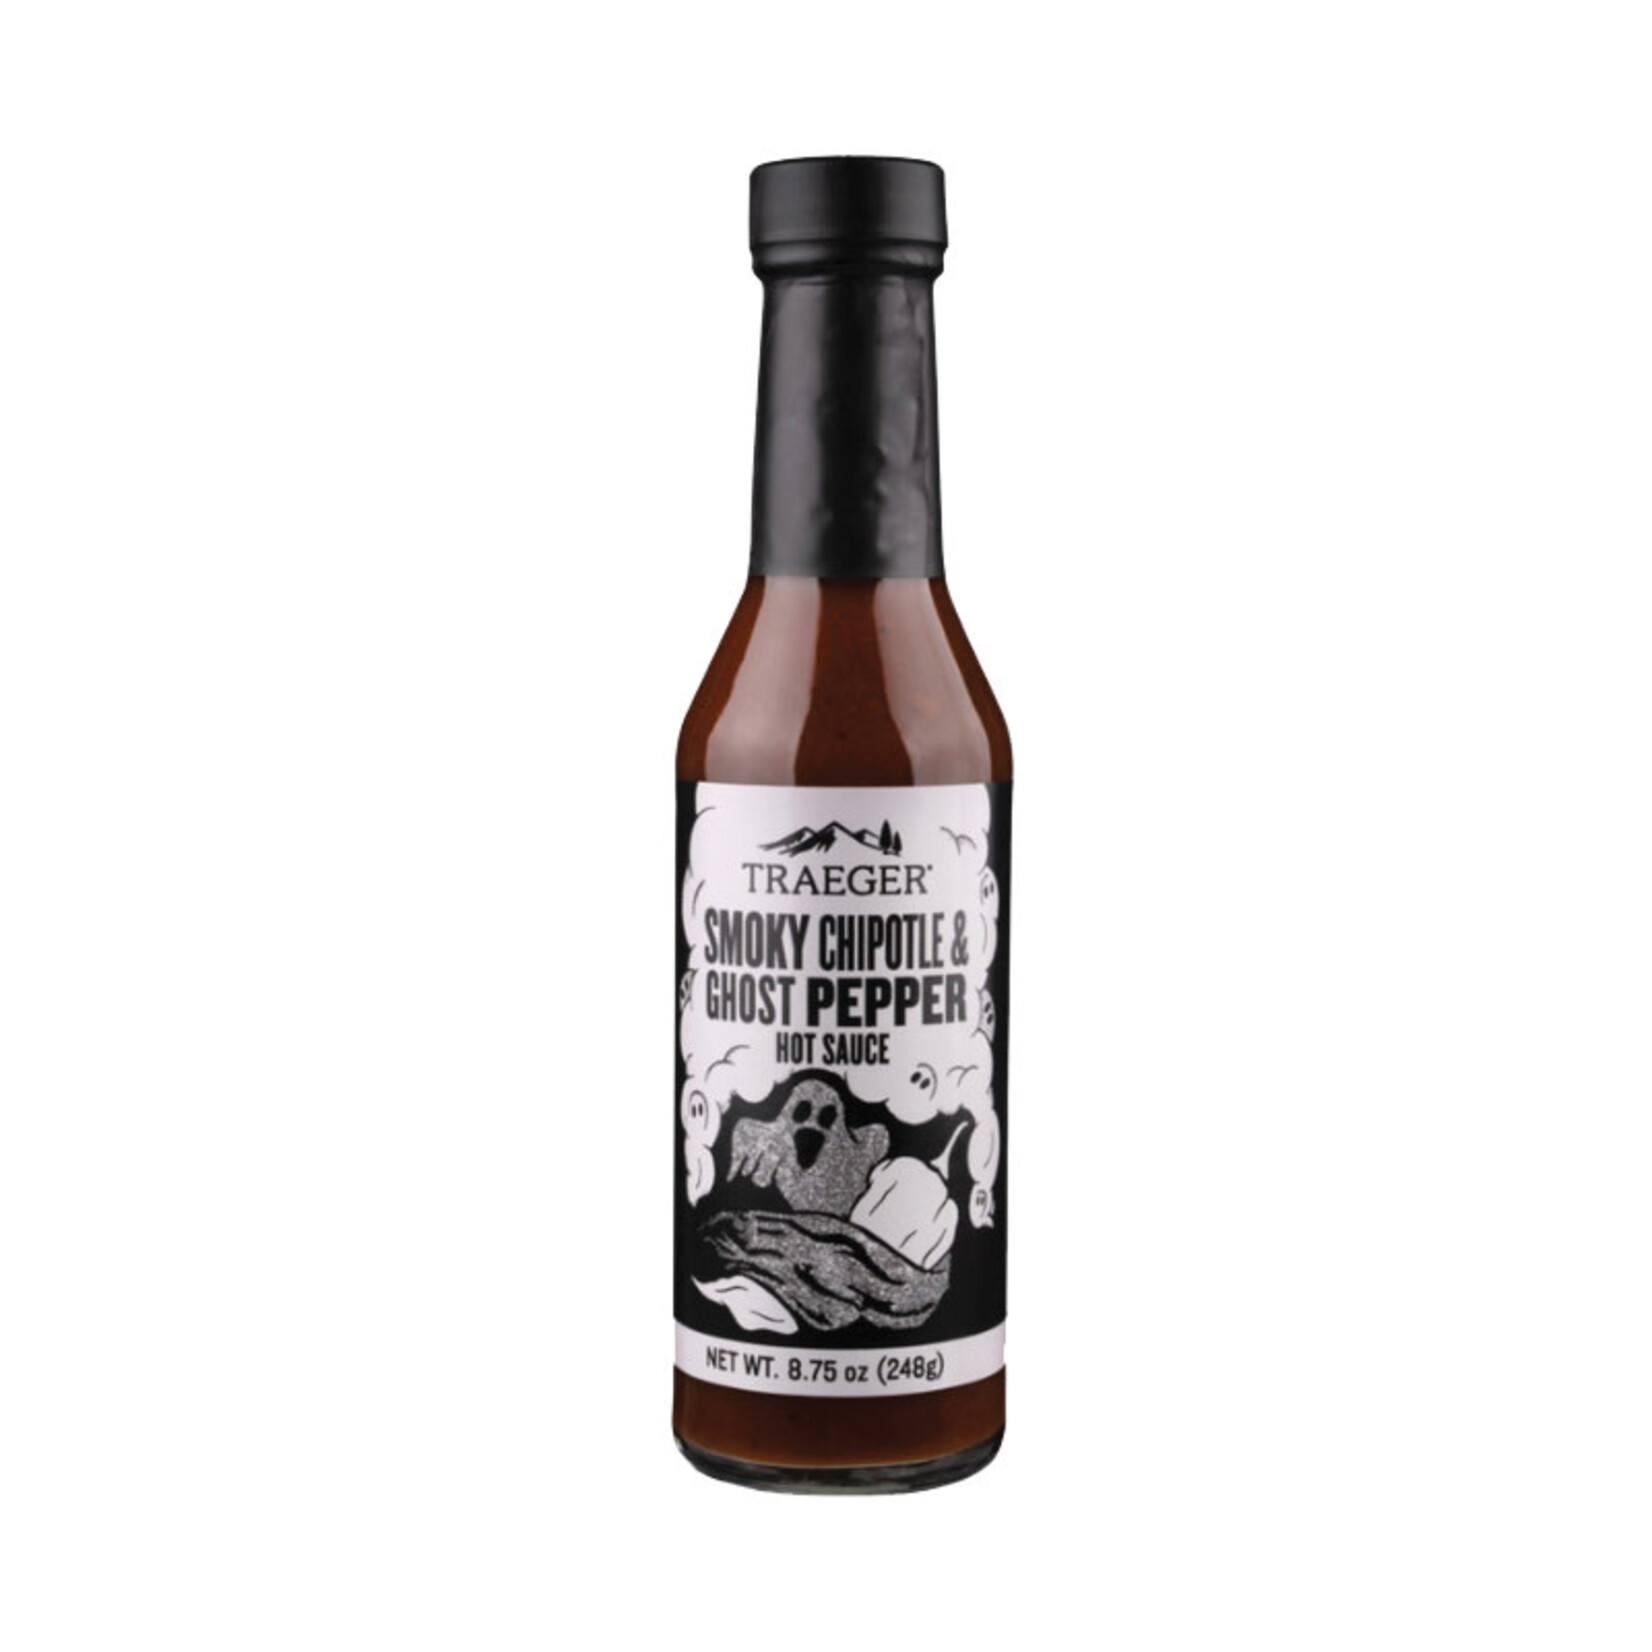 Traeger Smoky Chipotle & Ghost Pepper Hot Sauce